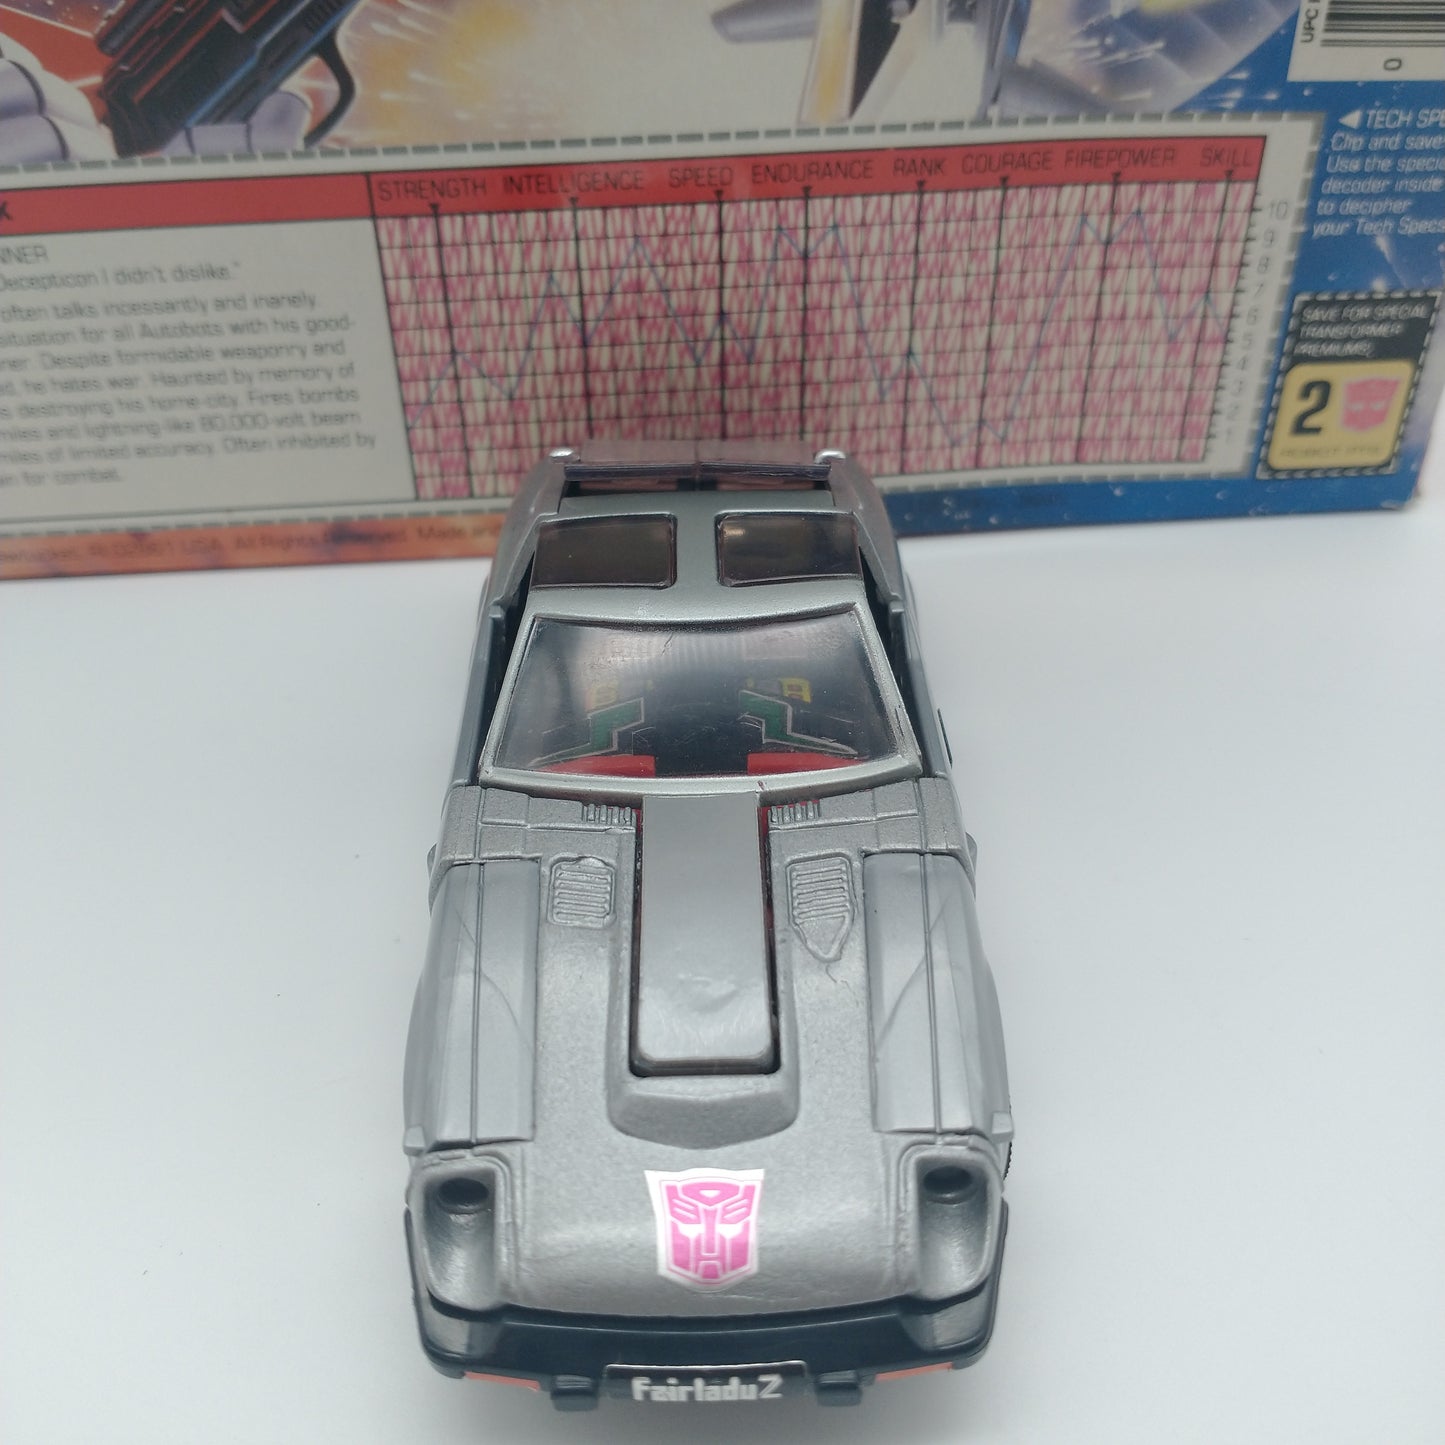 The front of the toy in car form